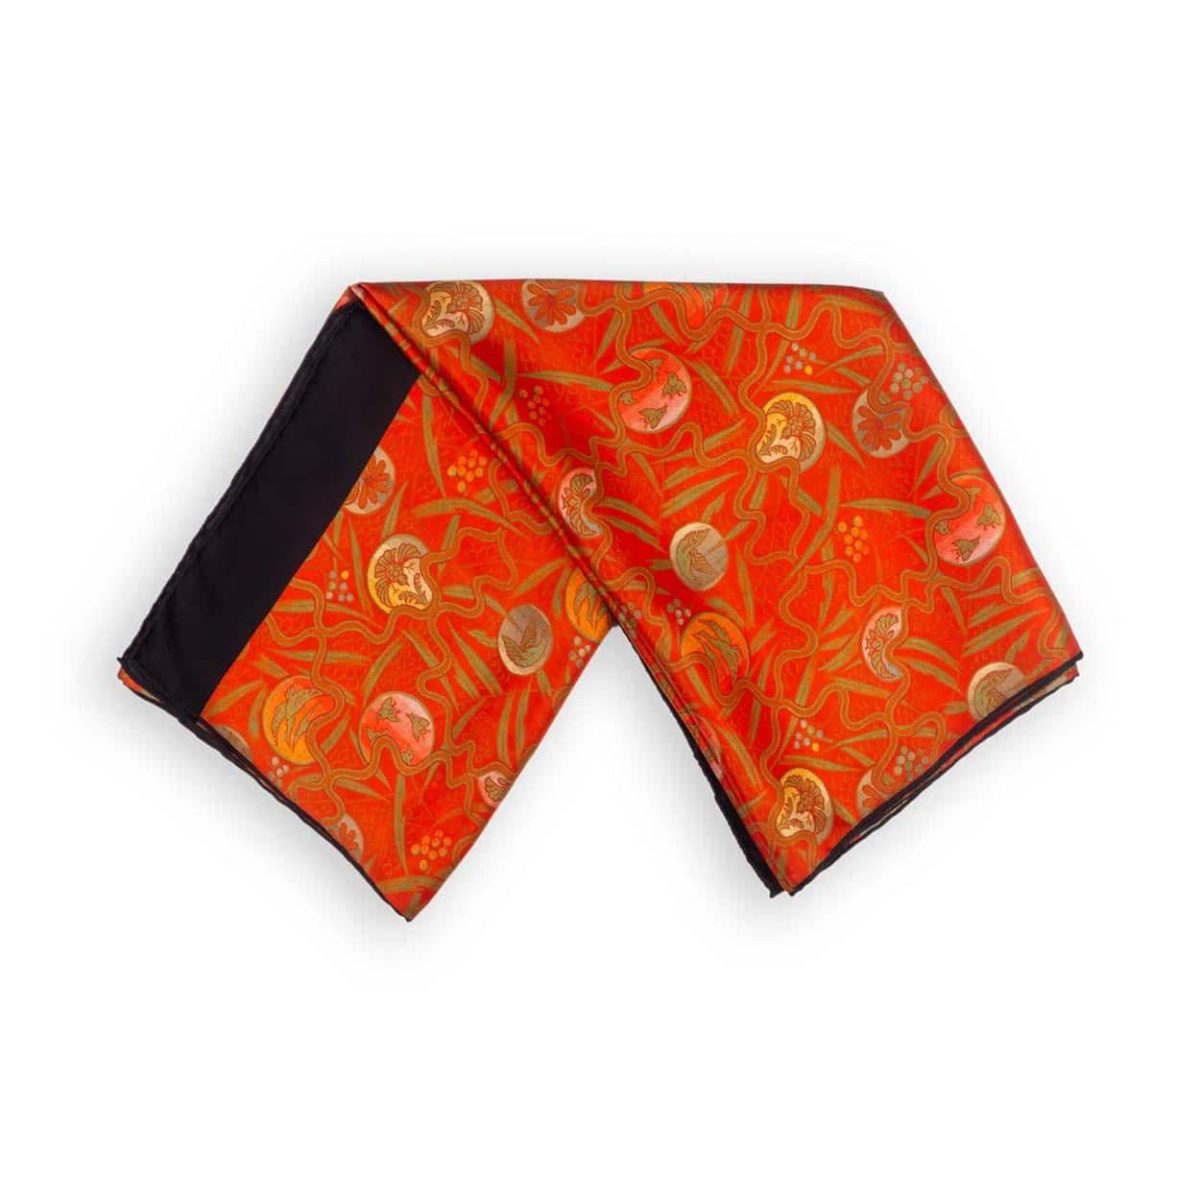 Black and red scarf with art nouveau print